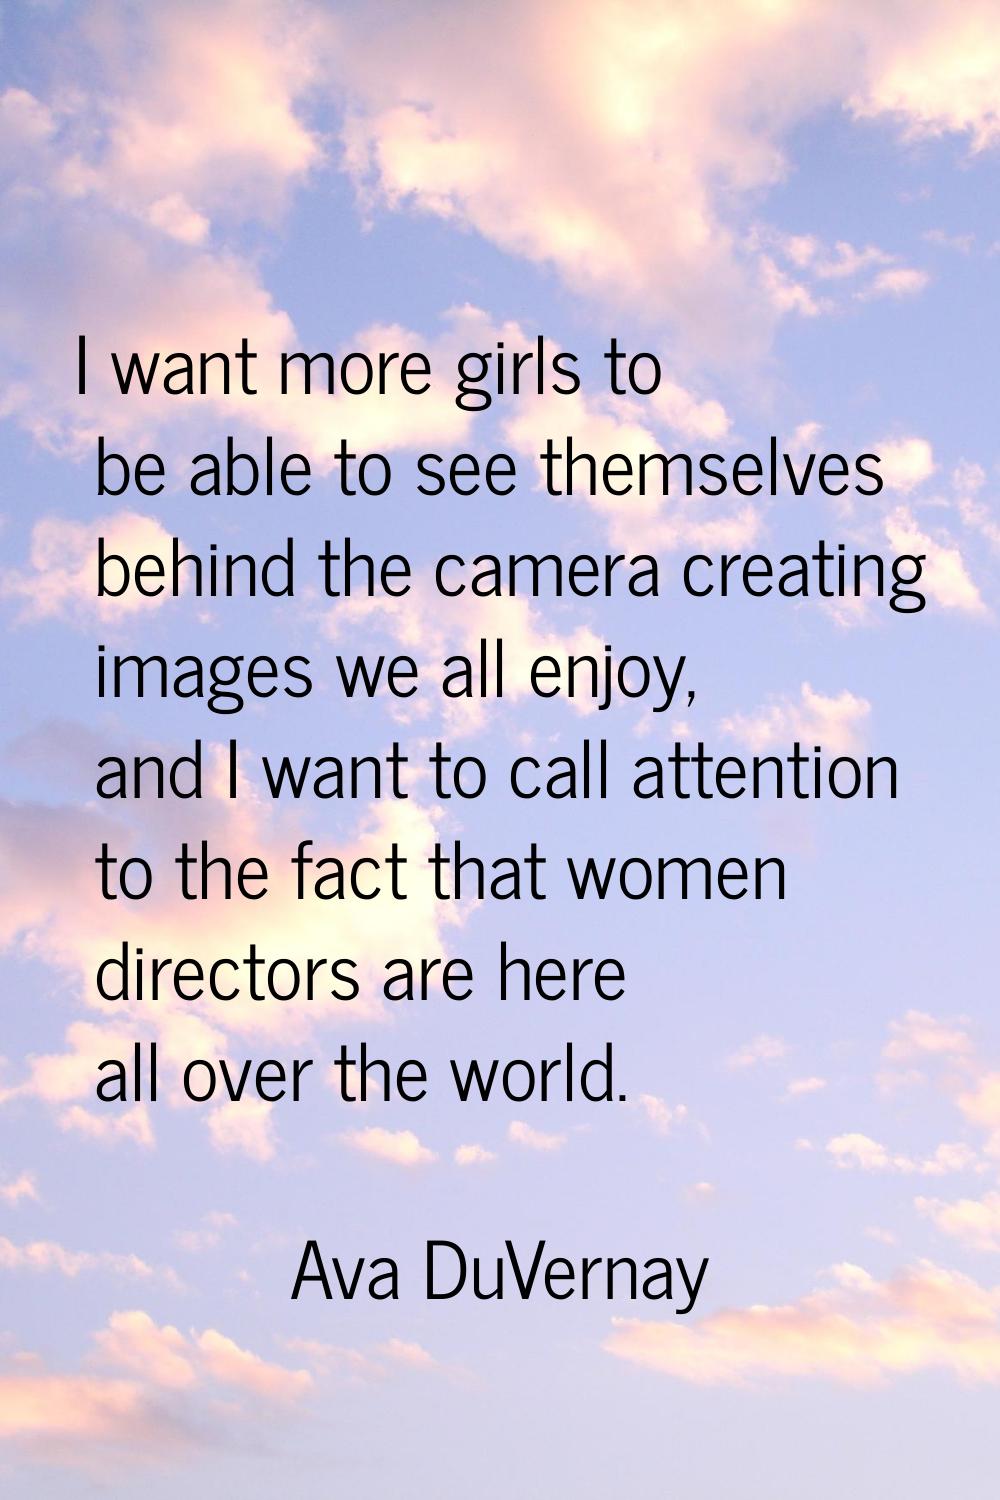 I want more girls to be able to see themselves behind the camera creating images we all enjoy, and 